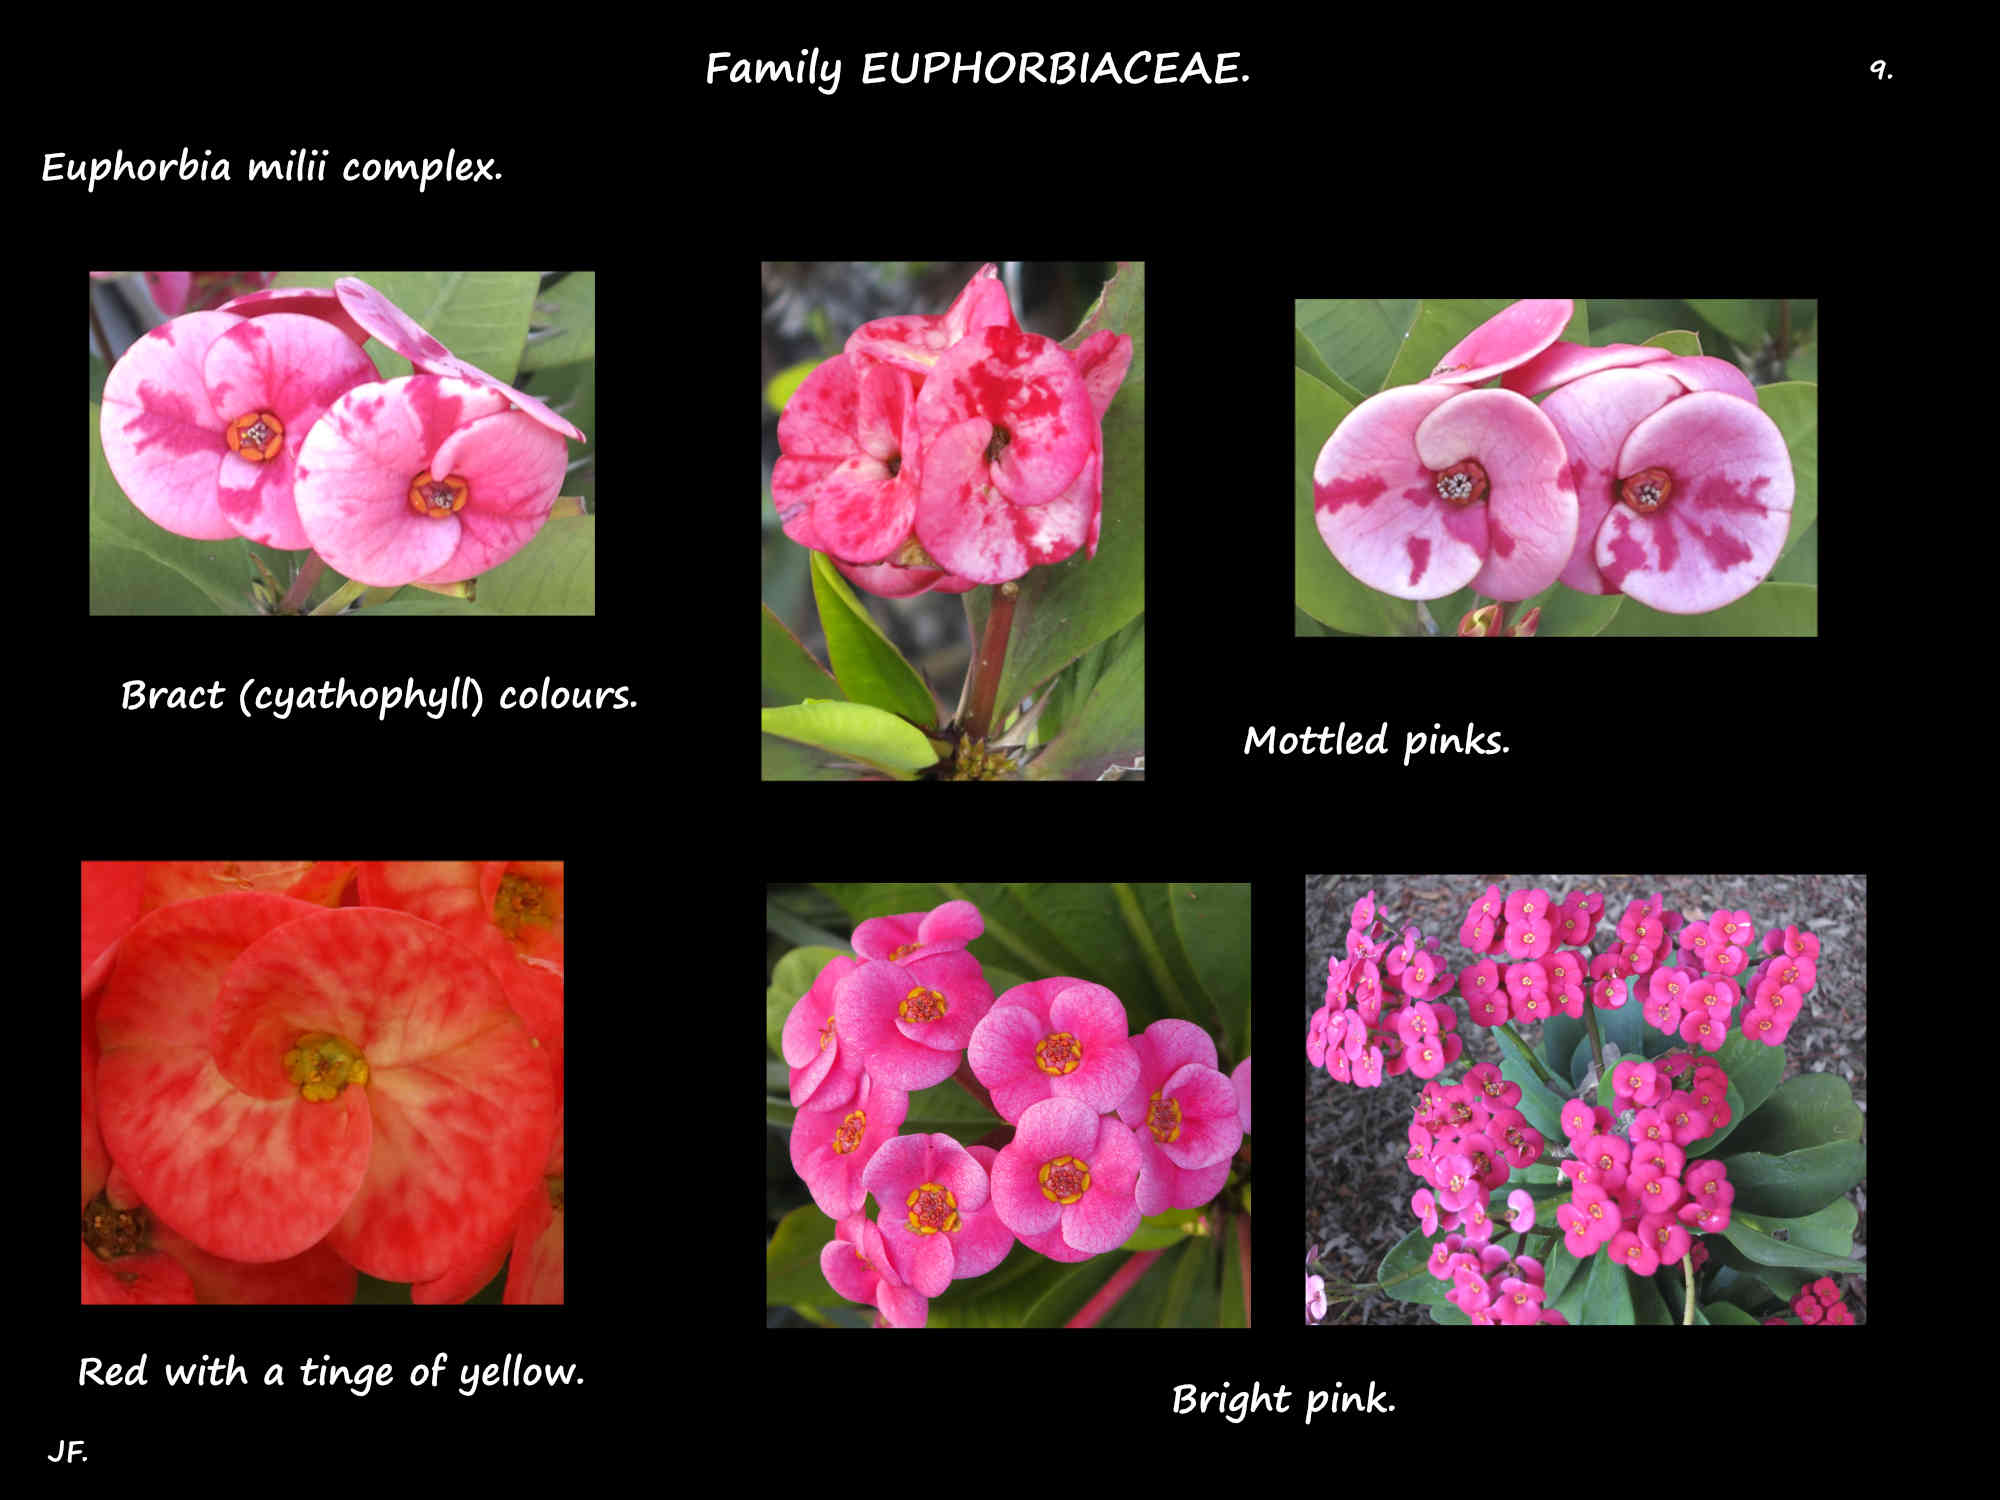 9 Red & pink 'Crown of thorns' cultivars